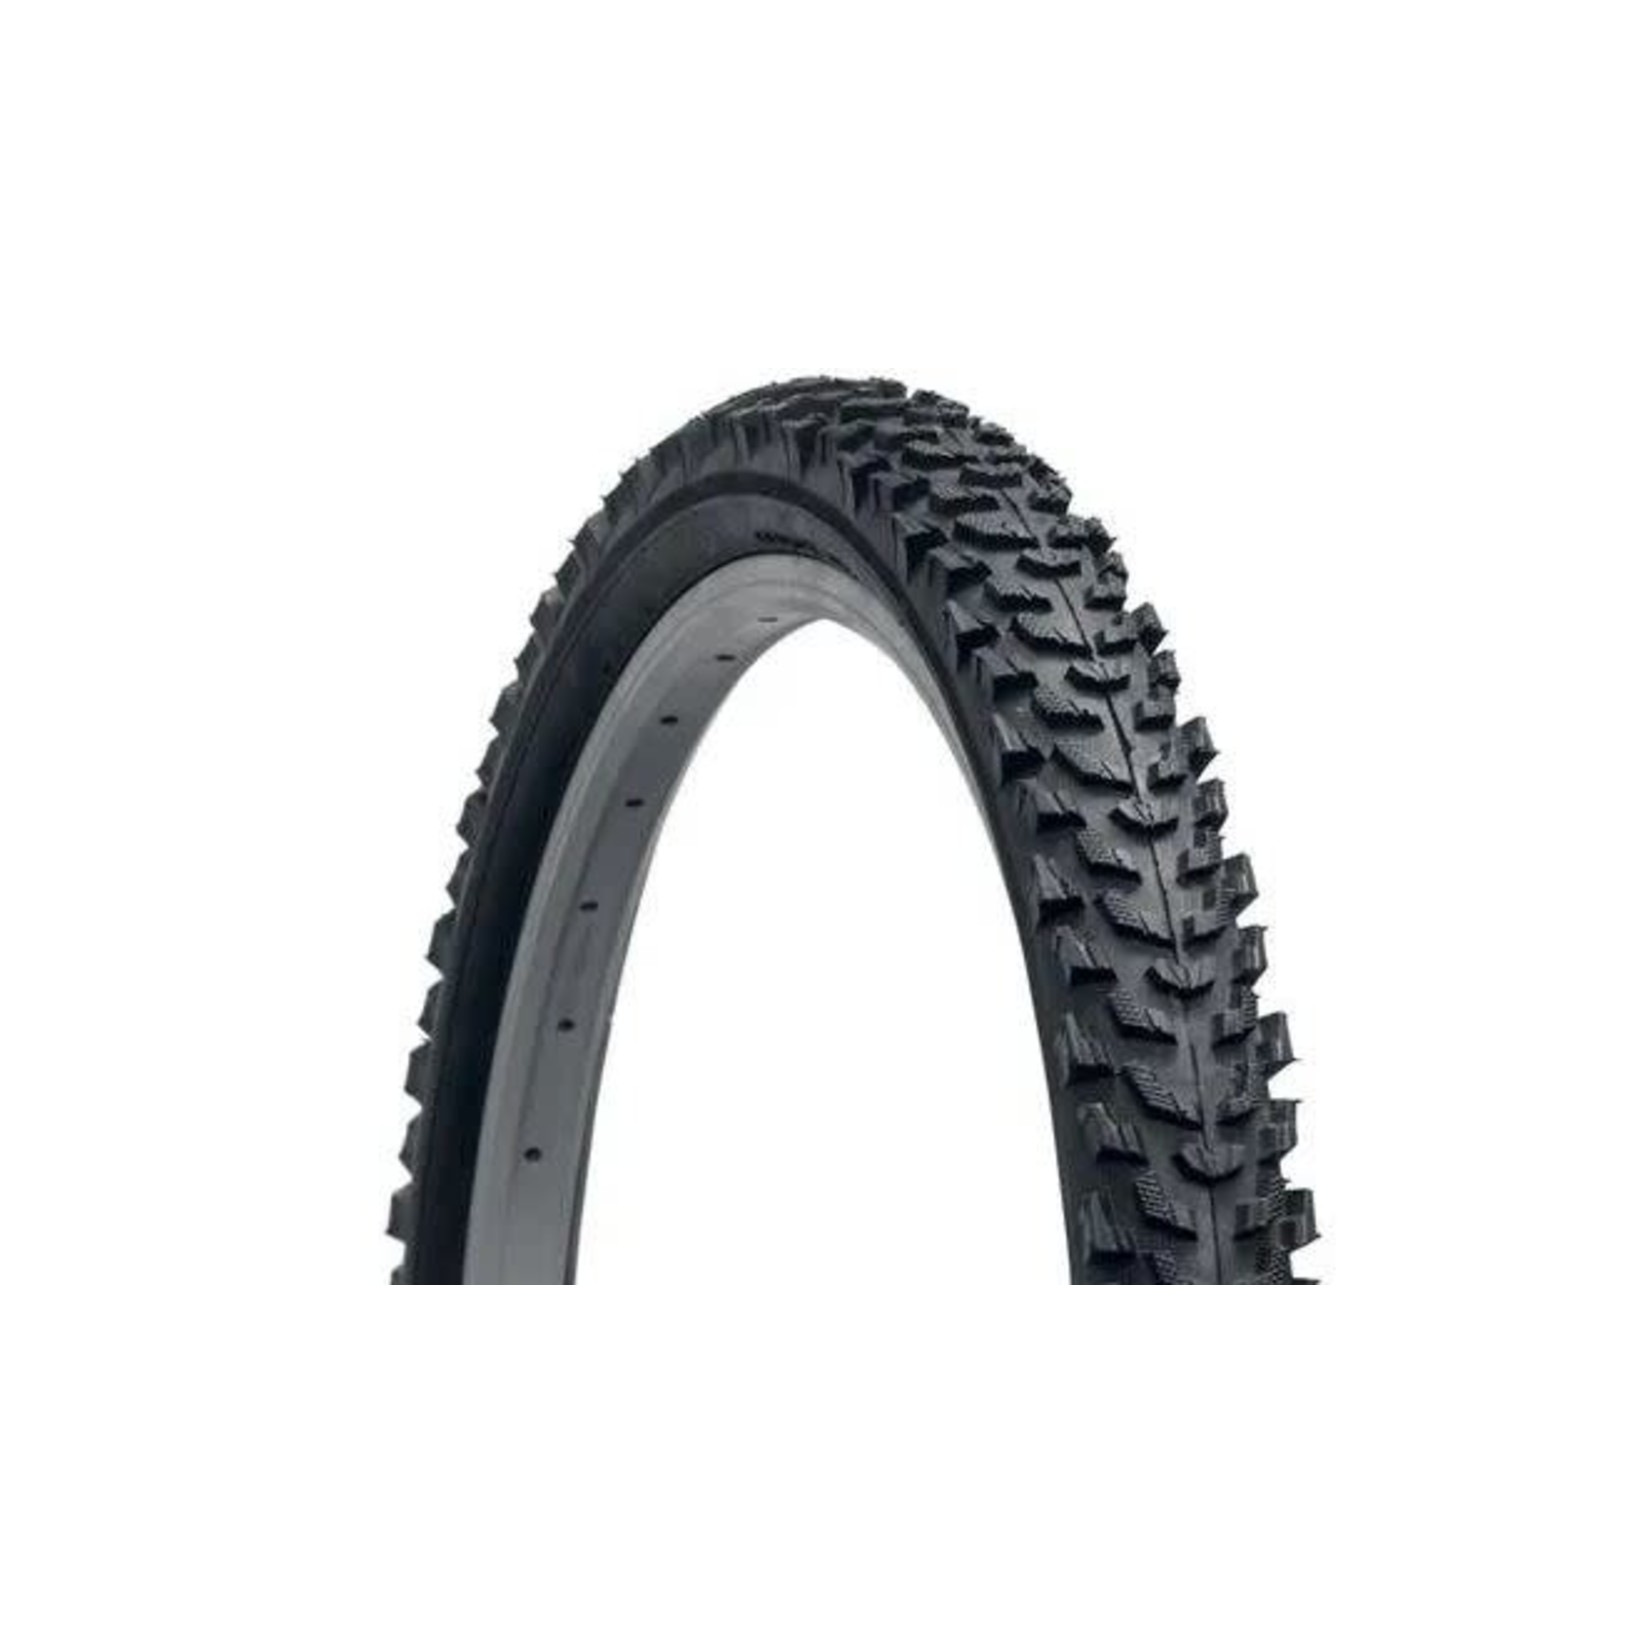 Duro Duro Bicycle Tyre - 24 X 2.1 - Quality Vee Rubber product - Black - Pair